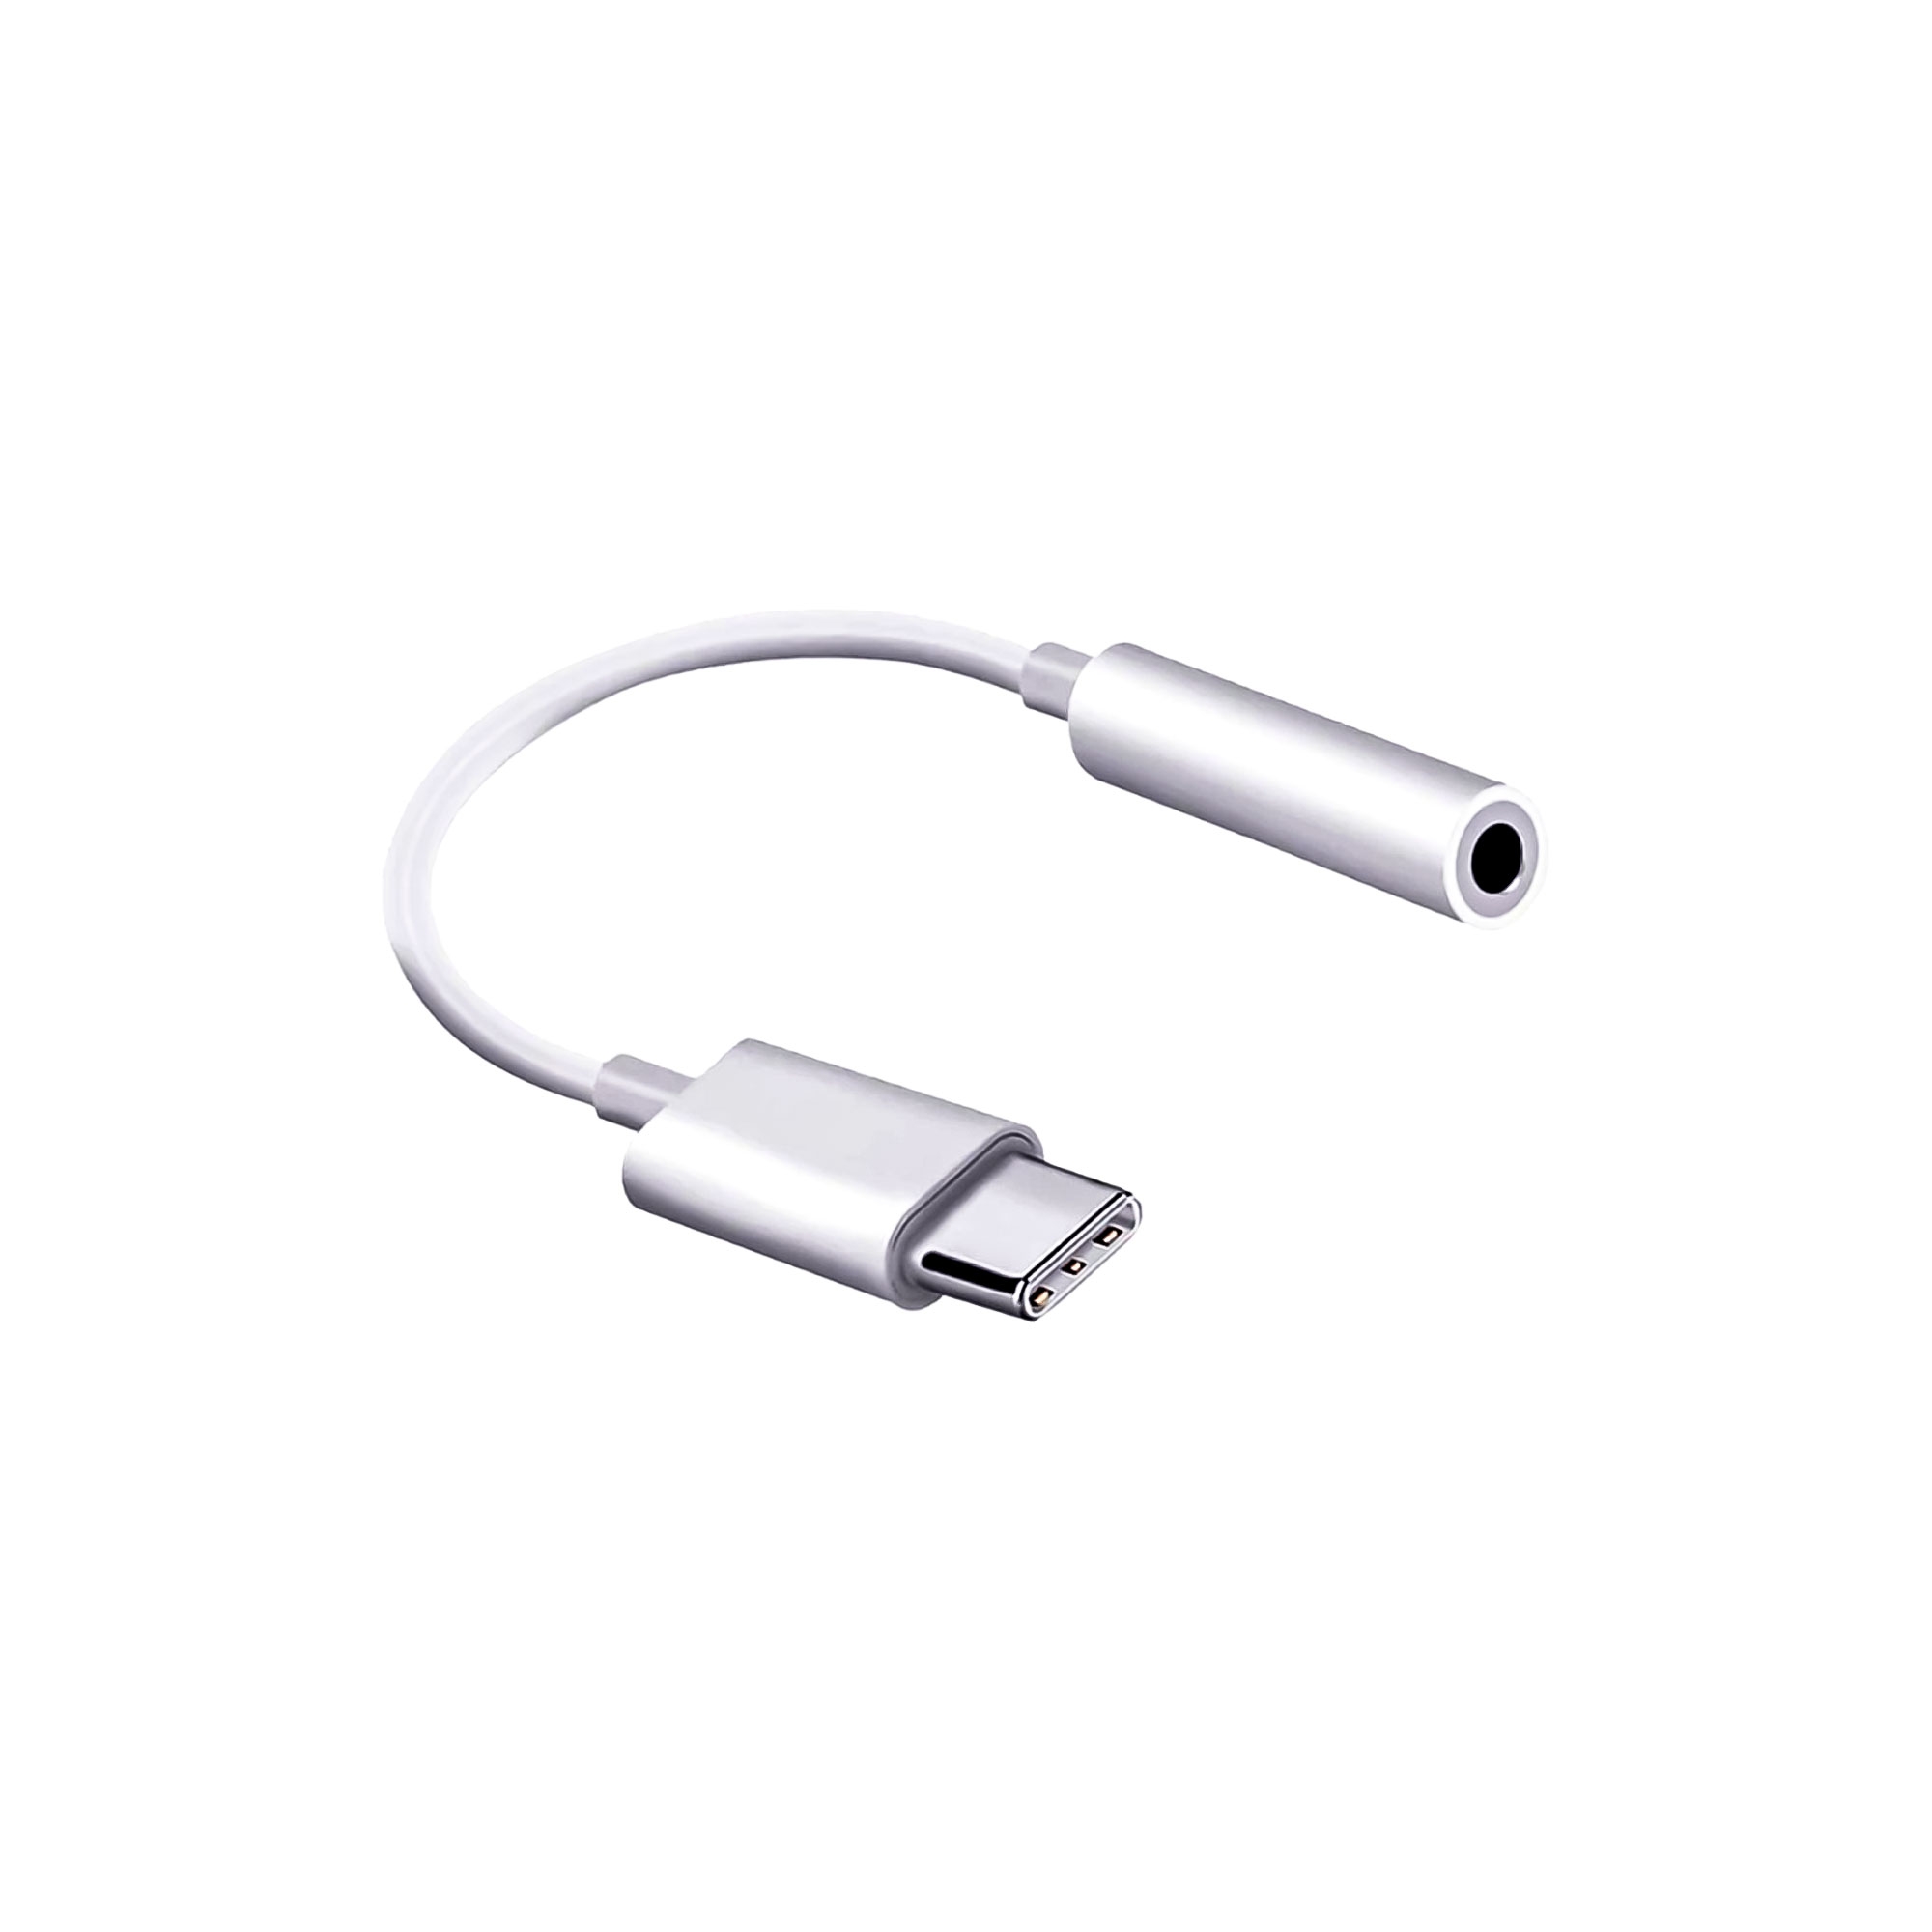 IRM 5862 - Cable USB C a Jack 3.5mm